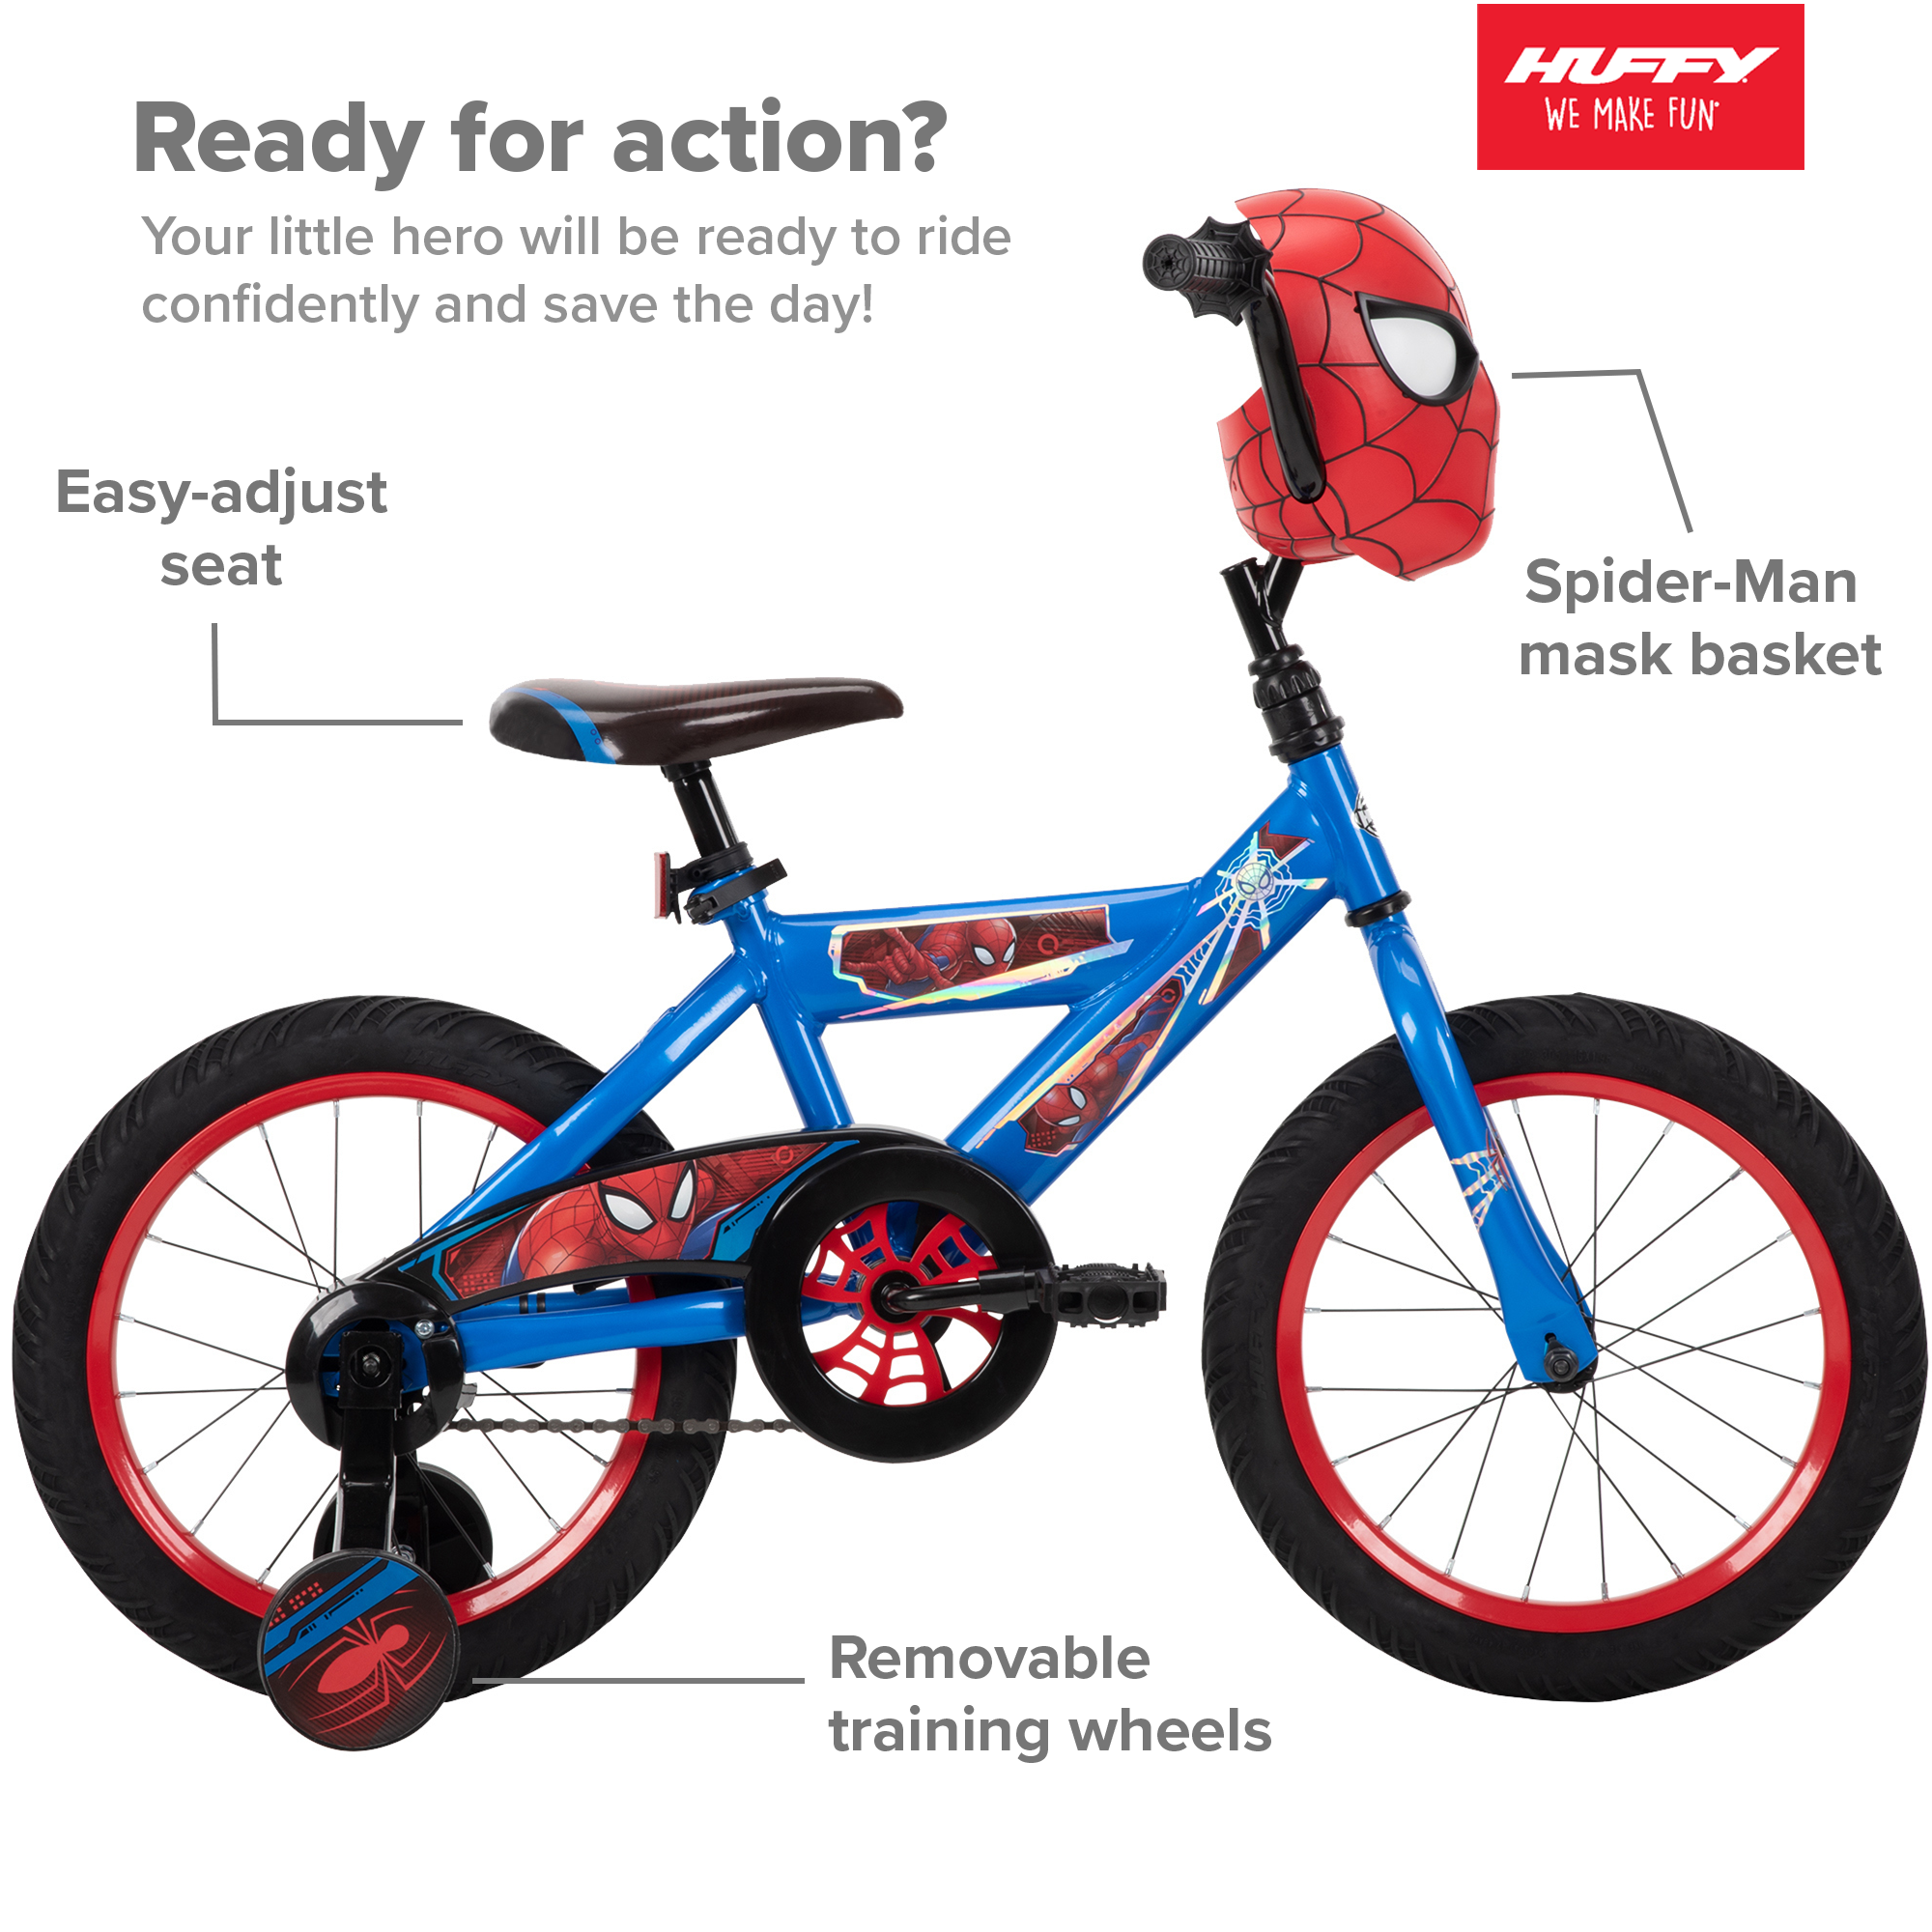 16" Marvel Spider-Man Bike for Boys' by Huffy - image 4 of 11